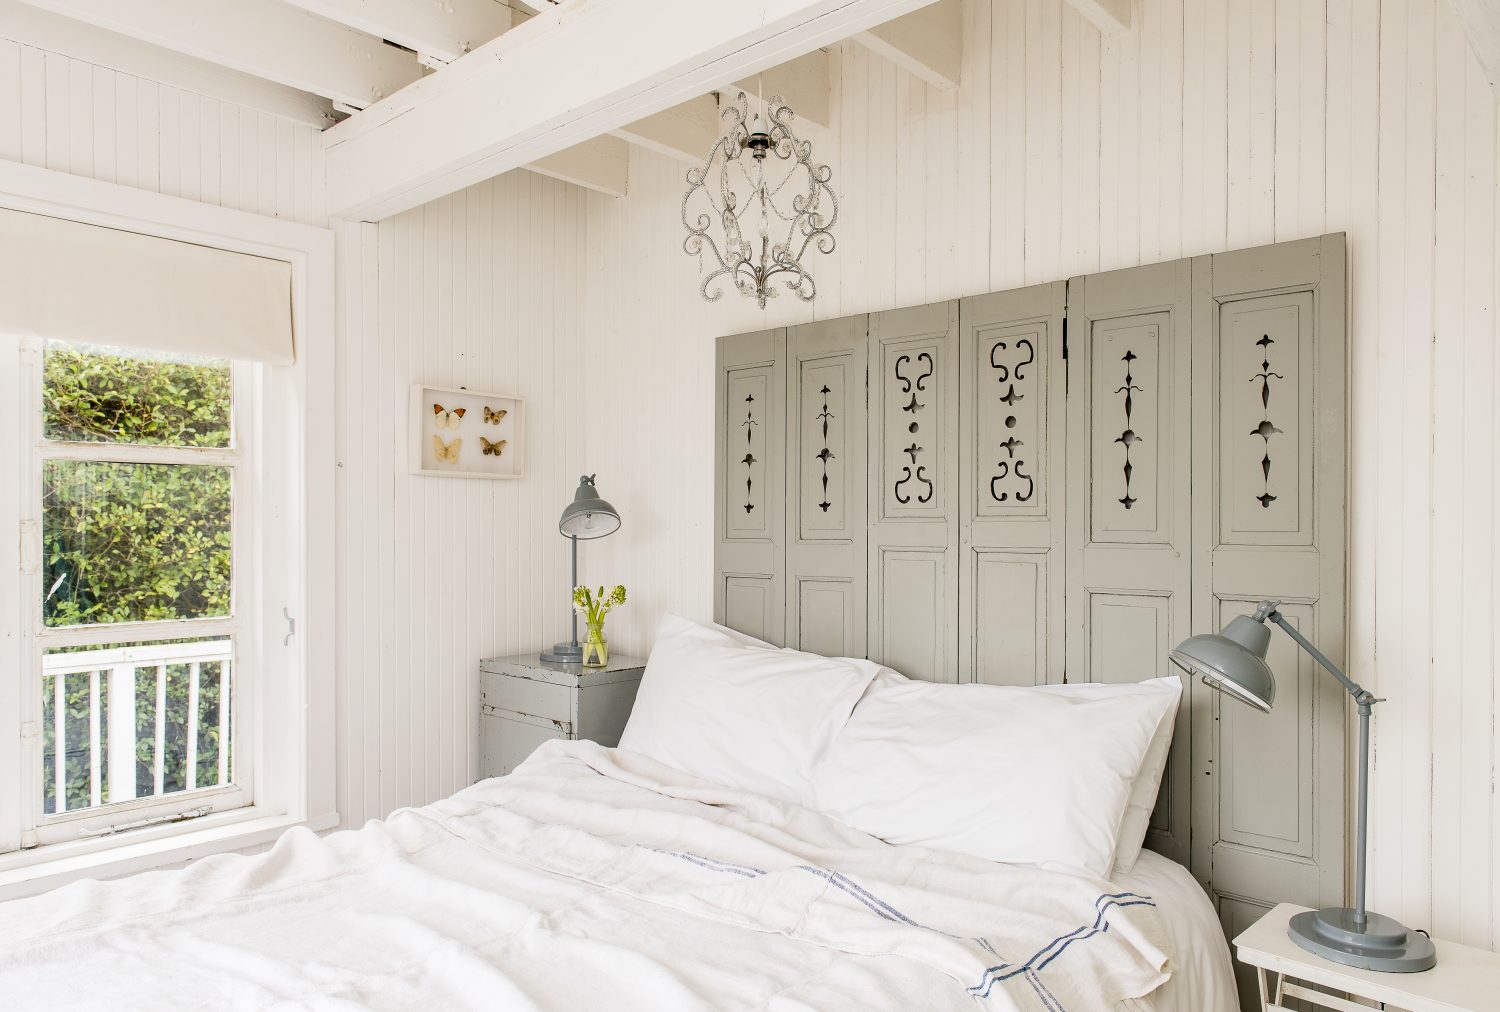 The headboard is made from old shutters painted with Farrow & Ball’s Lamp Room Gray. The bedside lamps are from Pale & Interesting